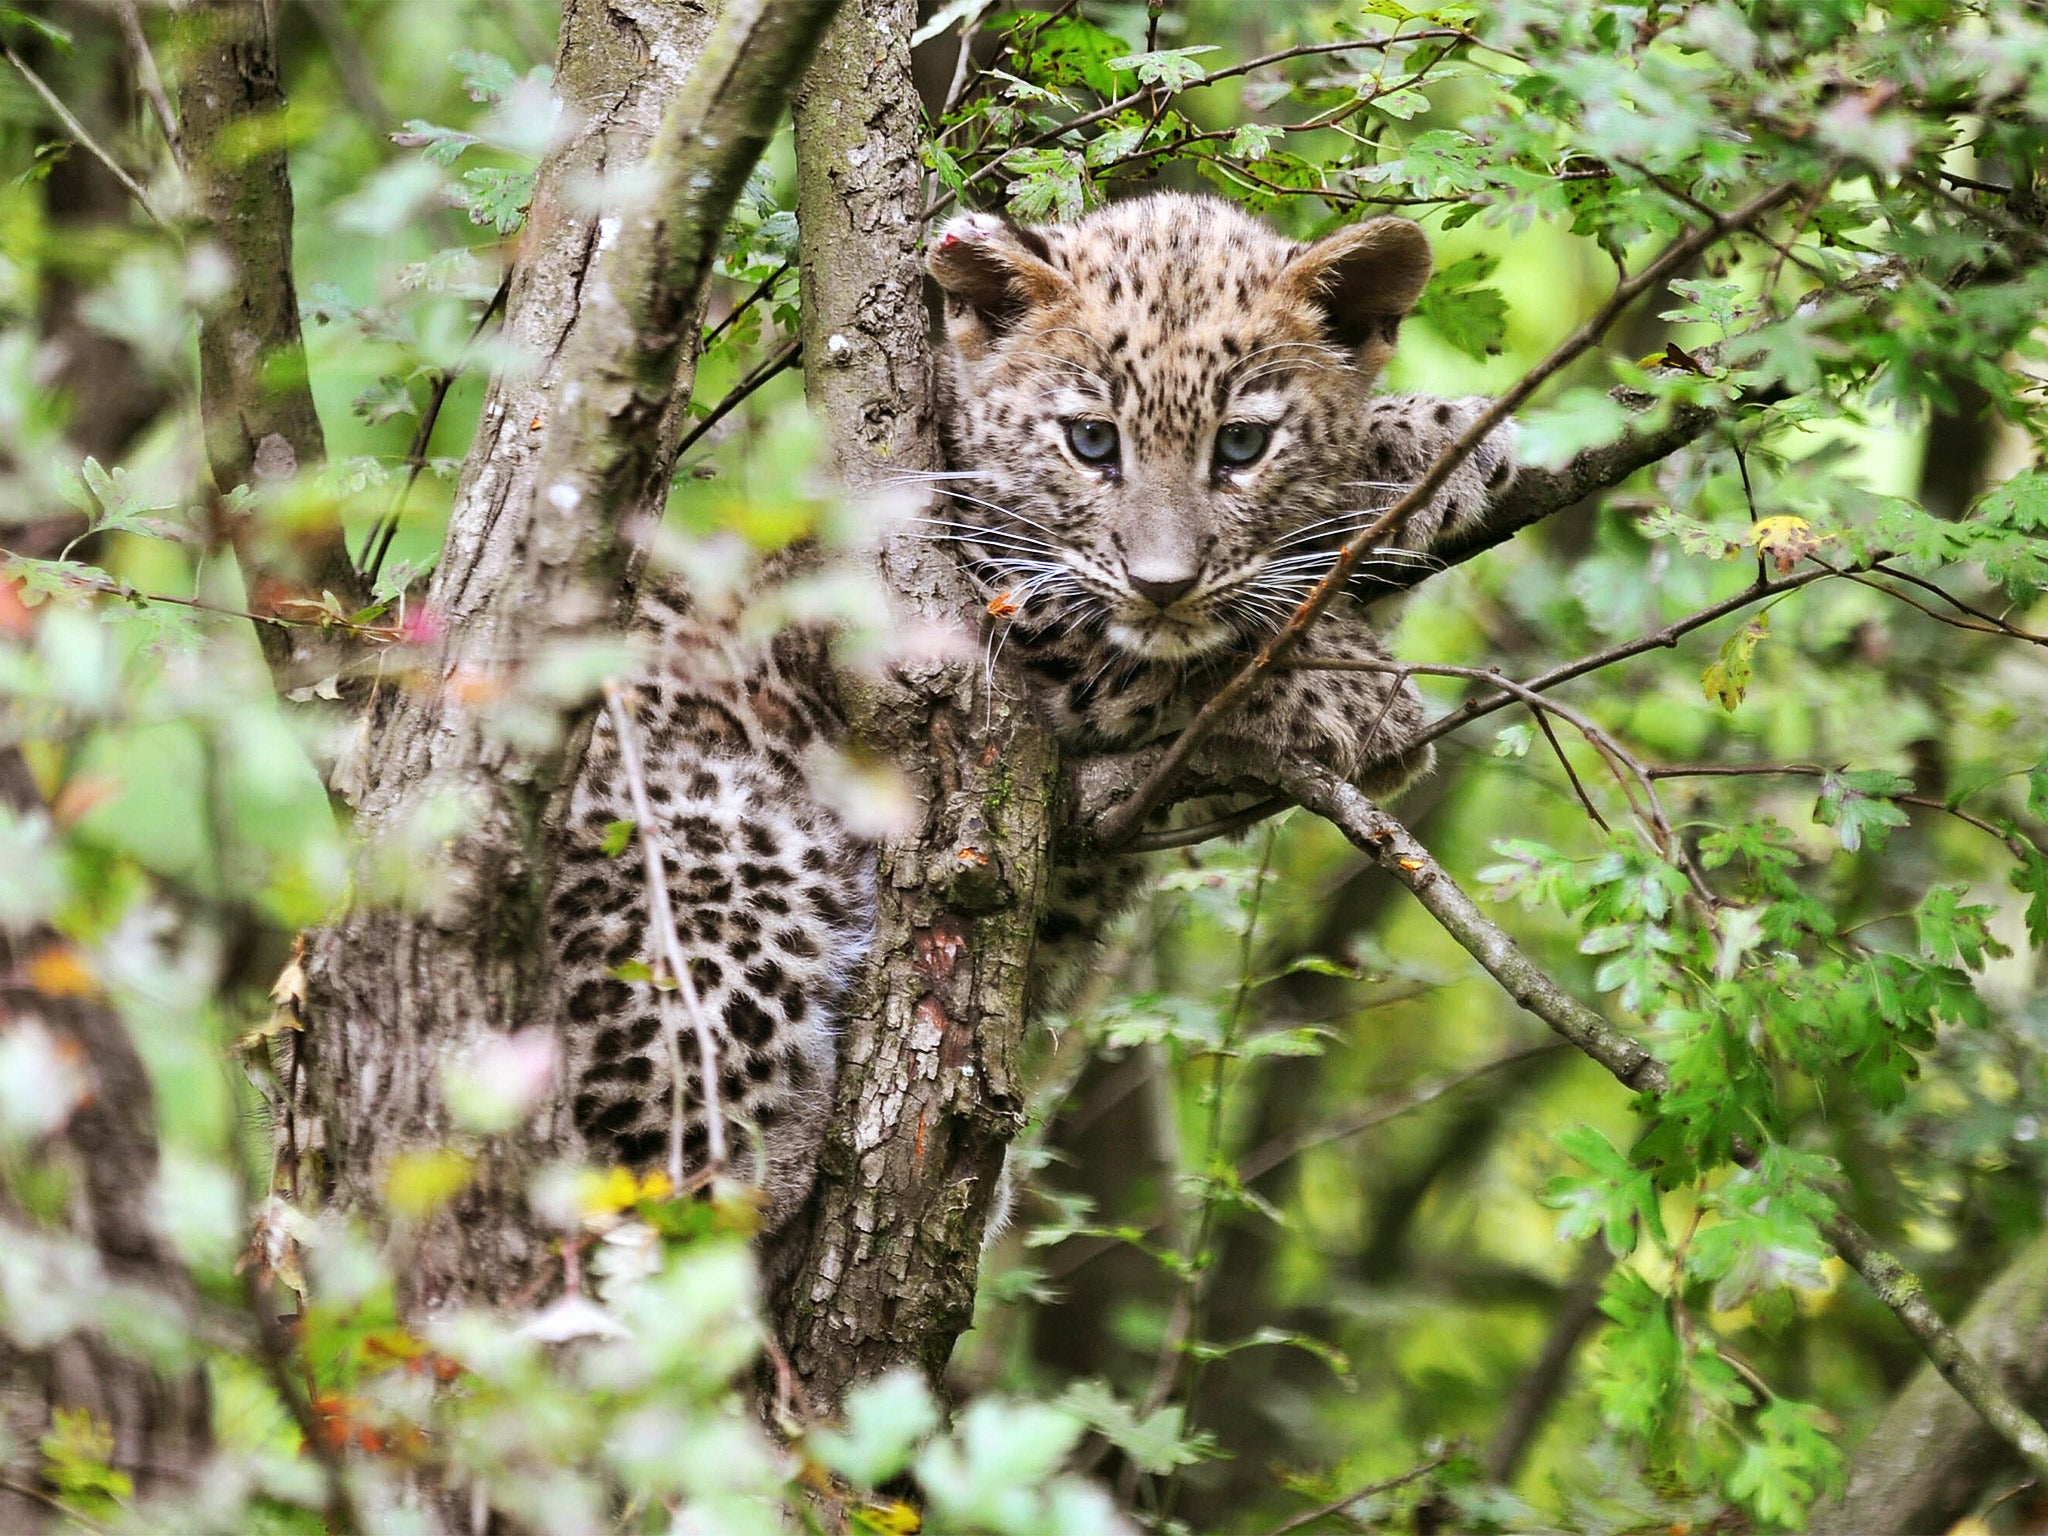 The endangered Persian leopard is thriving thanks to landmines